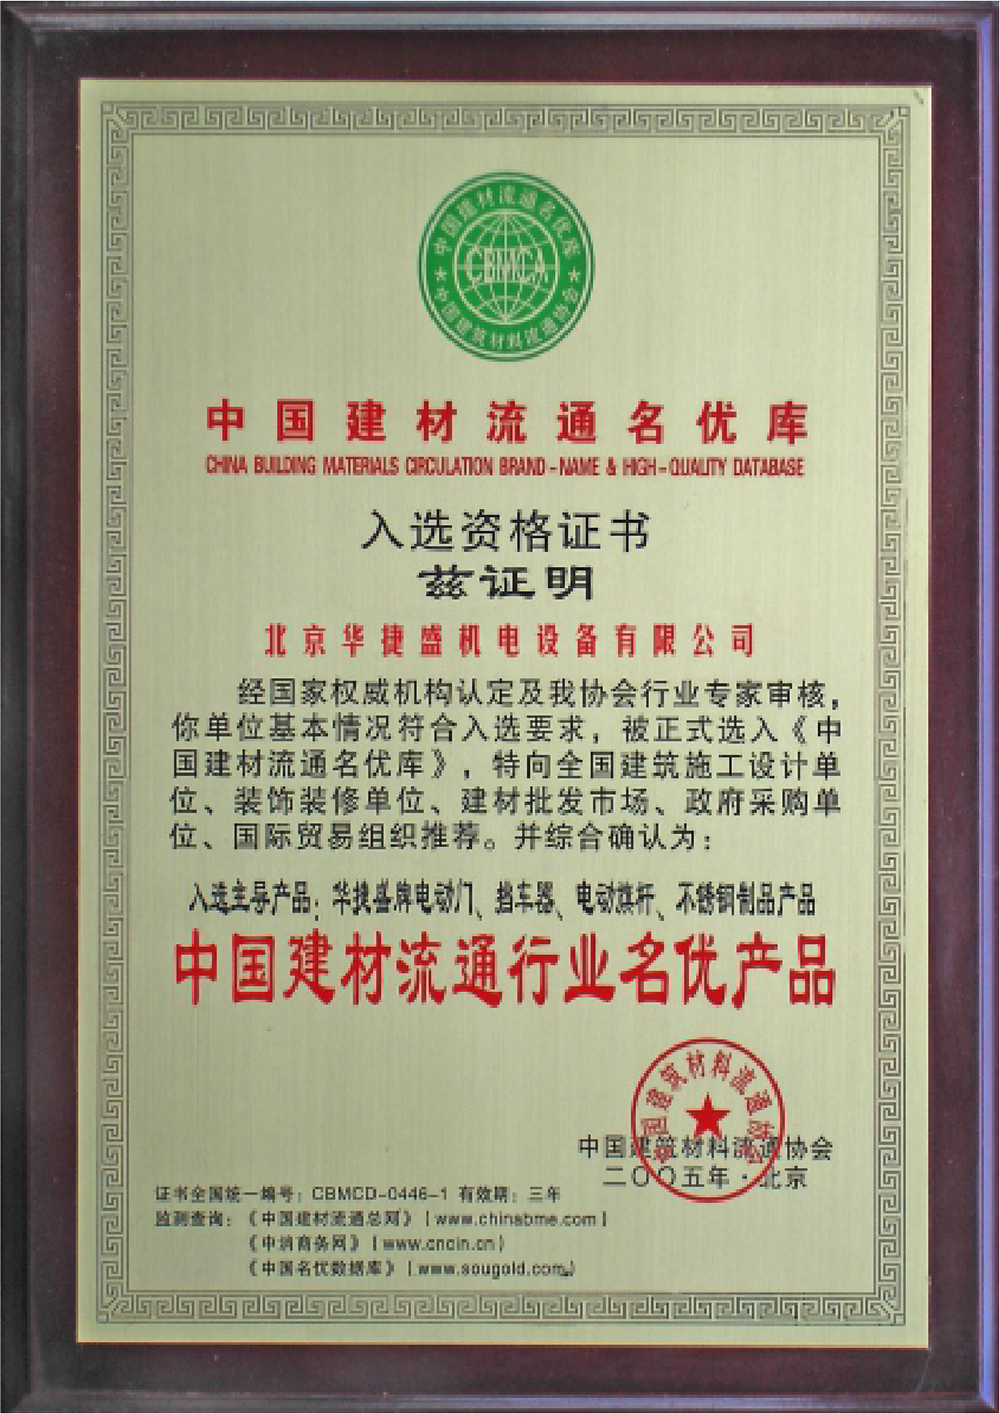 Selected as a famous product in China's building materials circulation industry in 2005